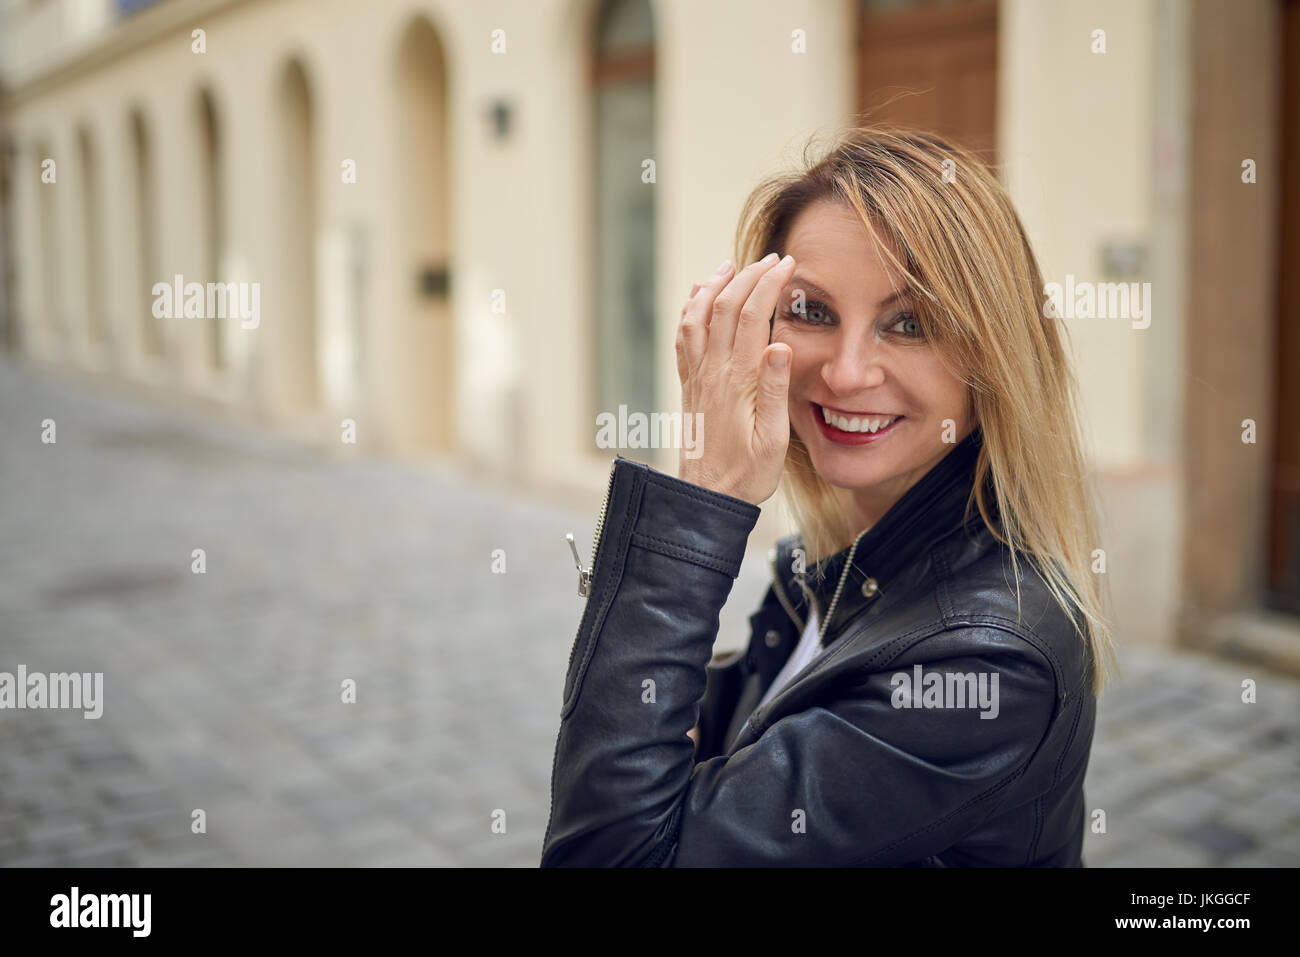 Attractive blond woman standing outdoors in a courtyard flicking her long blond hair off her face with her hand as she smiles at the camera Stock Photo